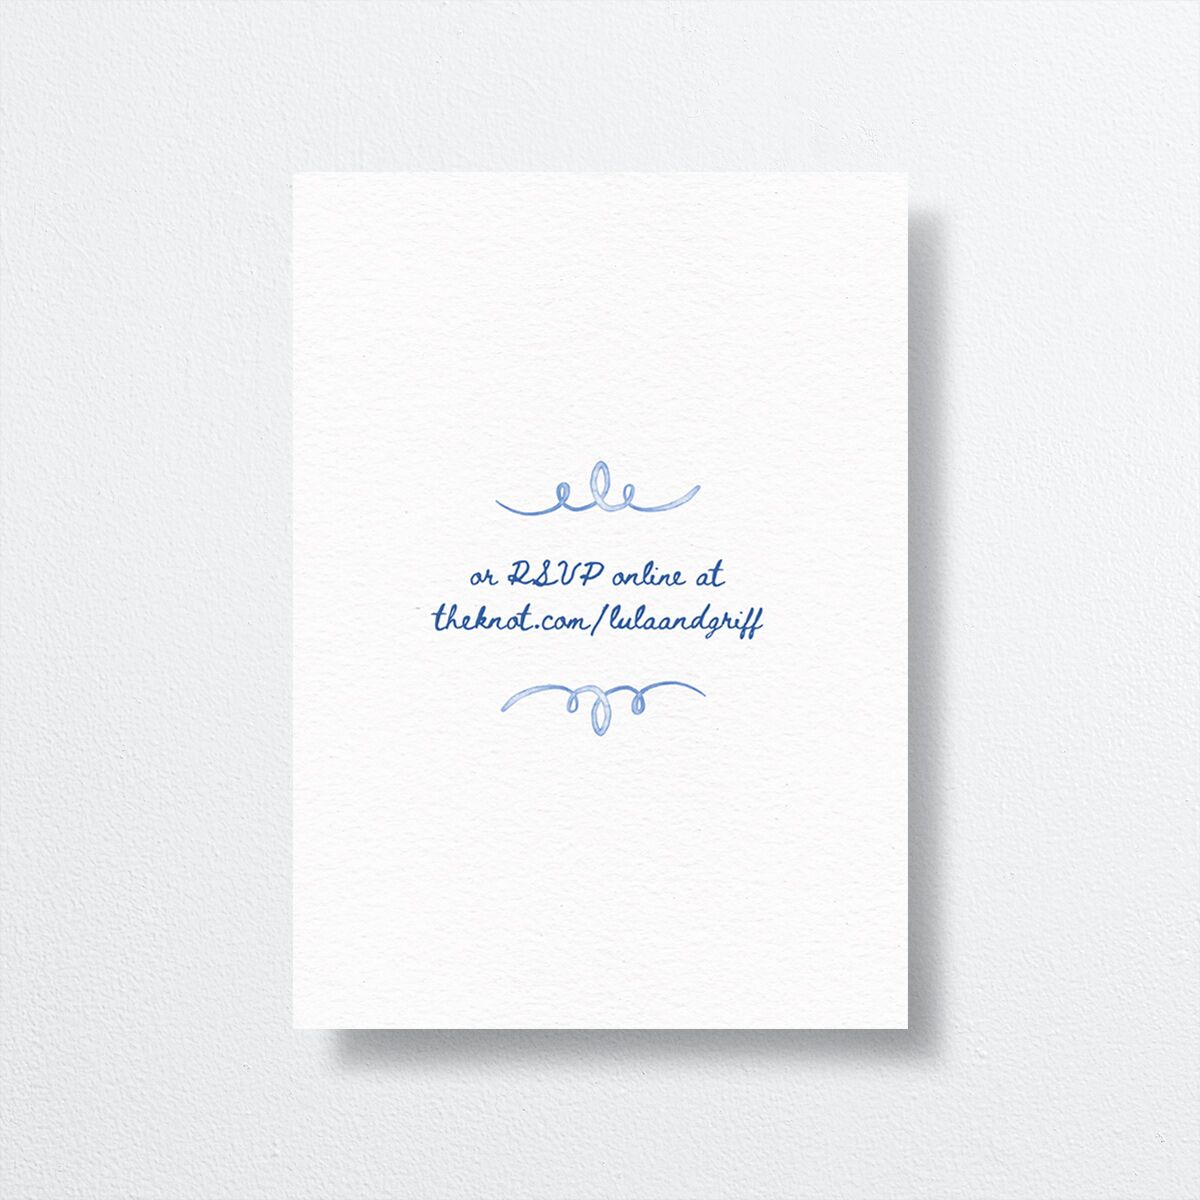 Countryside Crest Wedding Response Cards back in blue